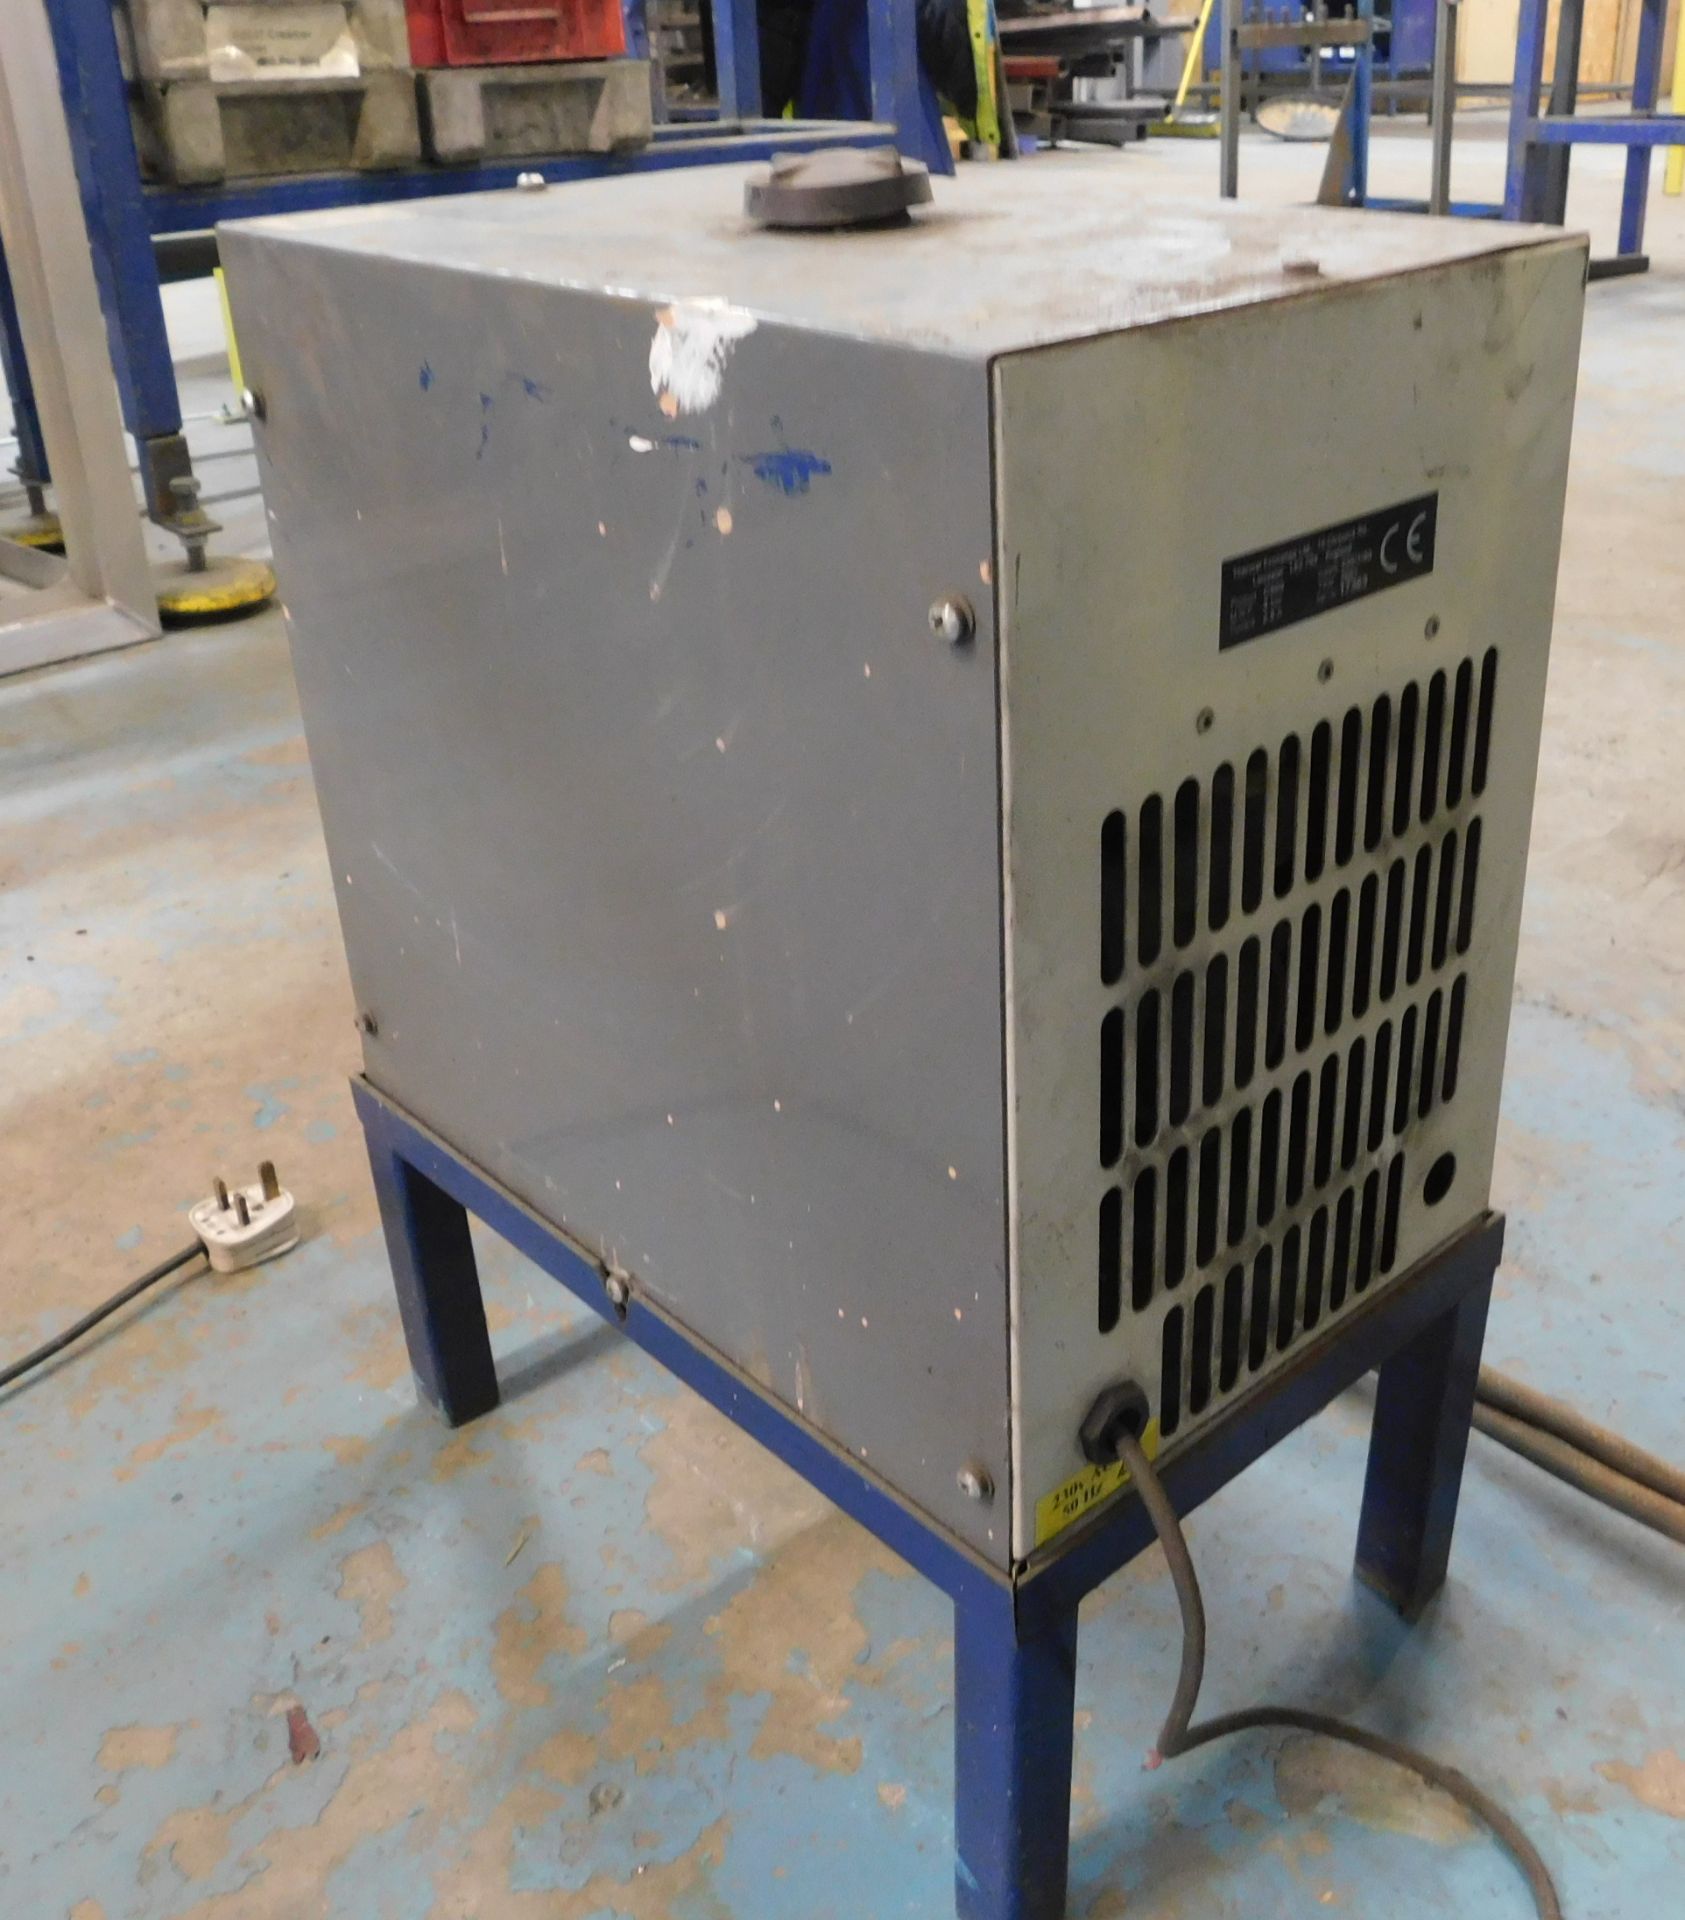 Costruzioni Model PPN52 Spot Welder, Serial Number 43832 with Thermal Exchange Unit, Serial Number - Image 3 of 5